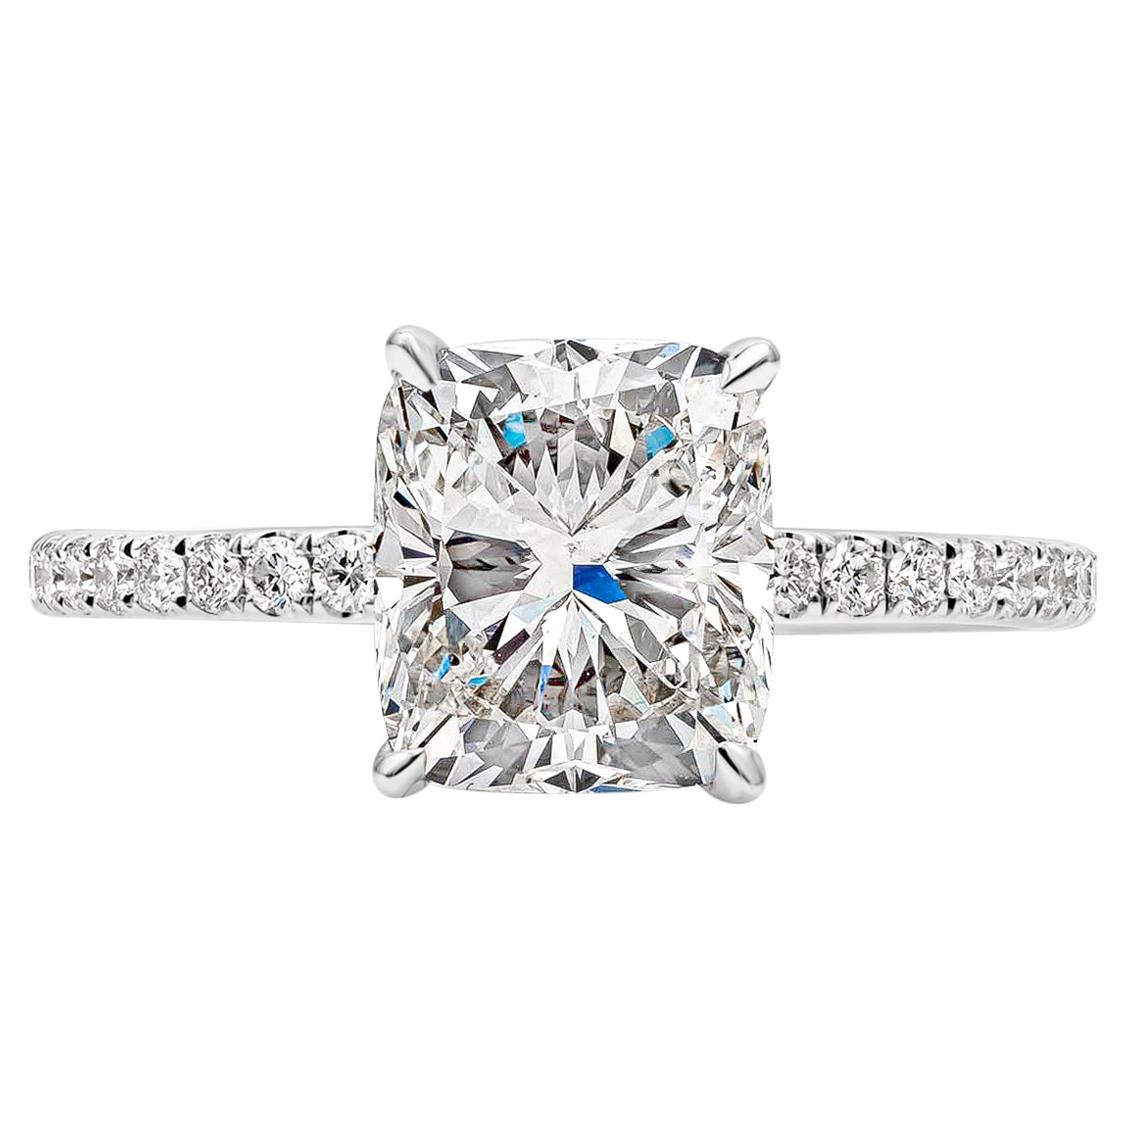 GIA Certified 2.20 Carats Cushion Cut Diamond Engagement Ring with Side Stones